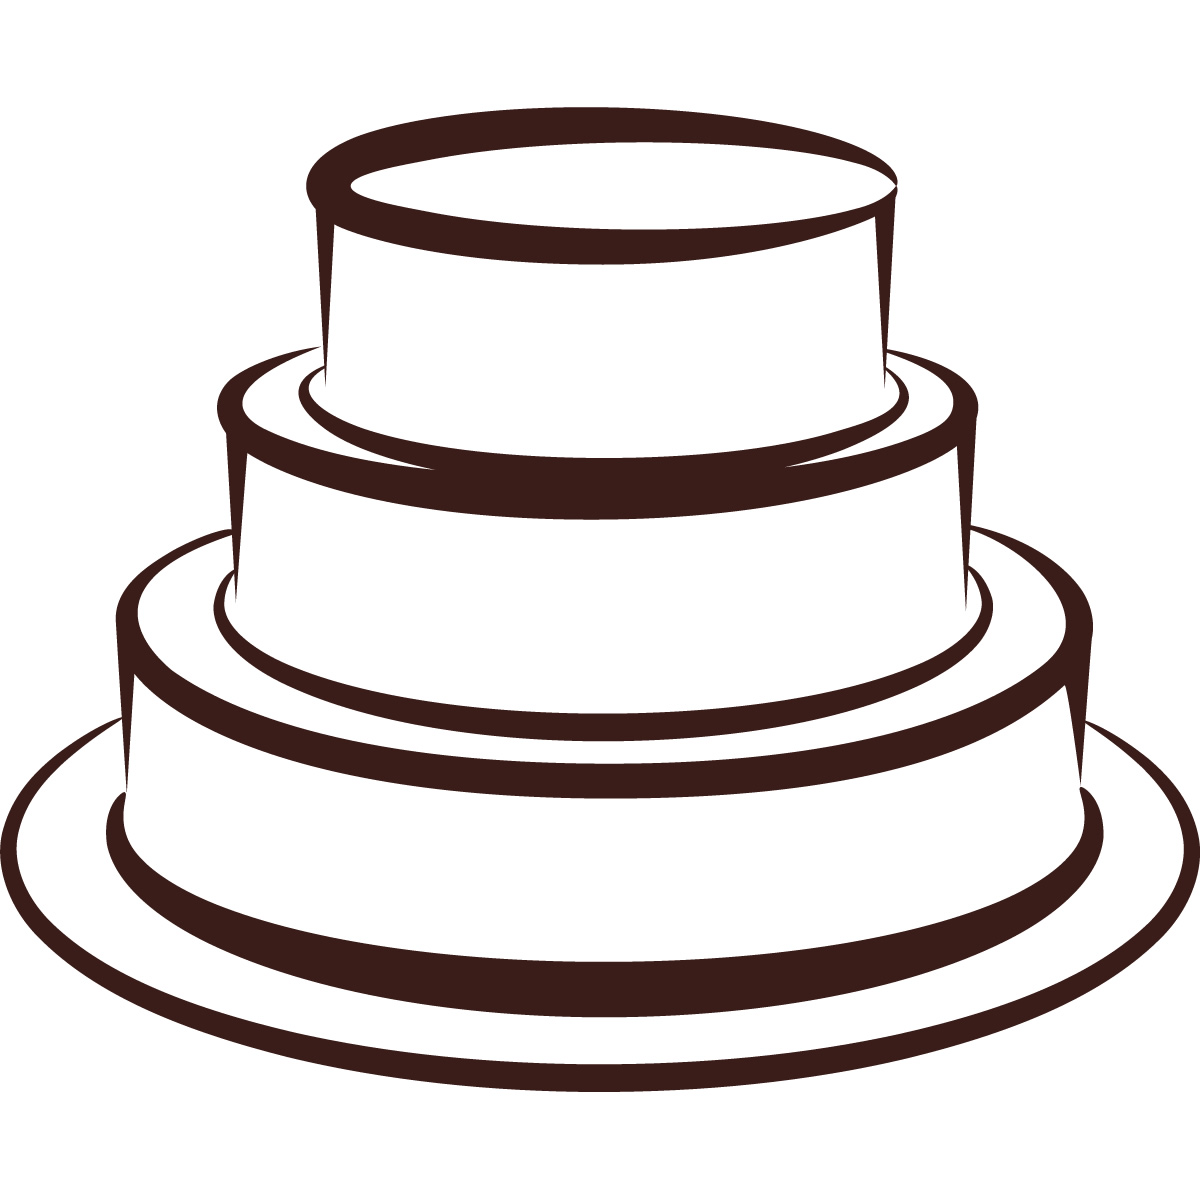 free clipart of wedding cakes - photo #29